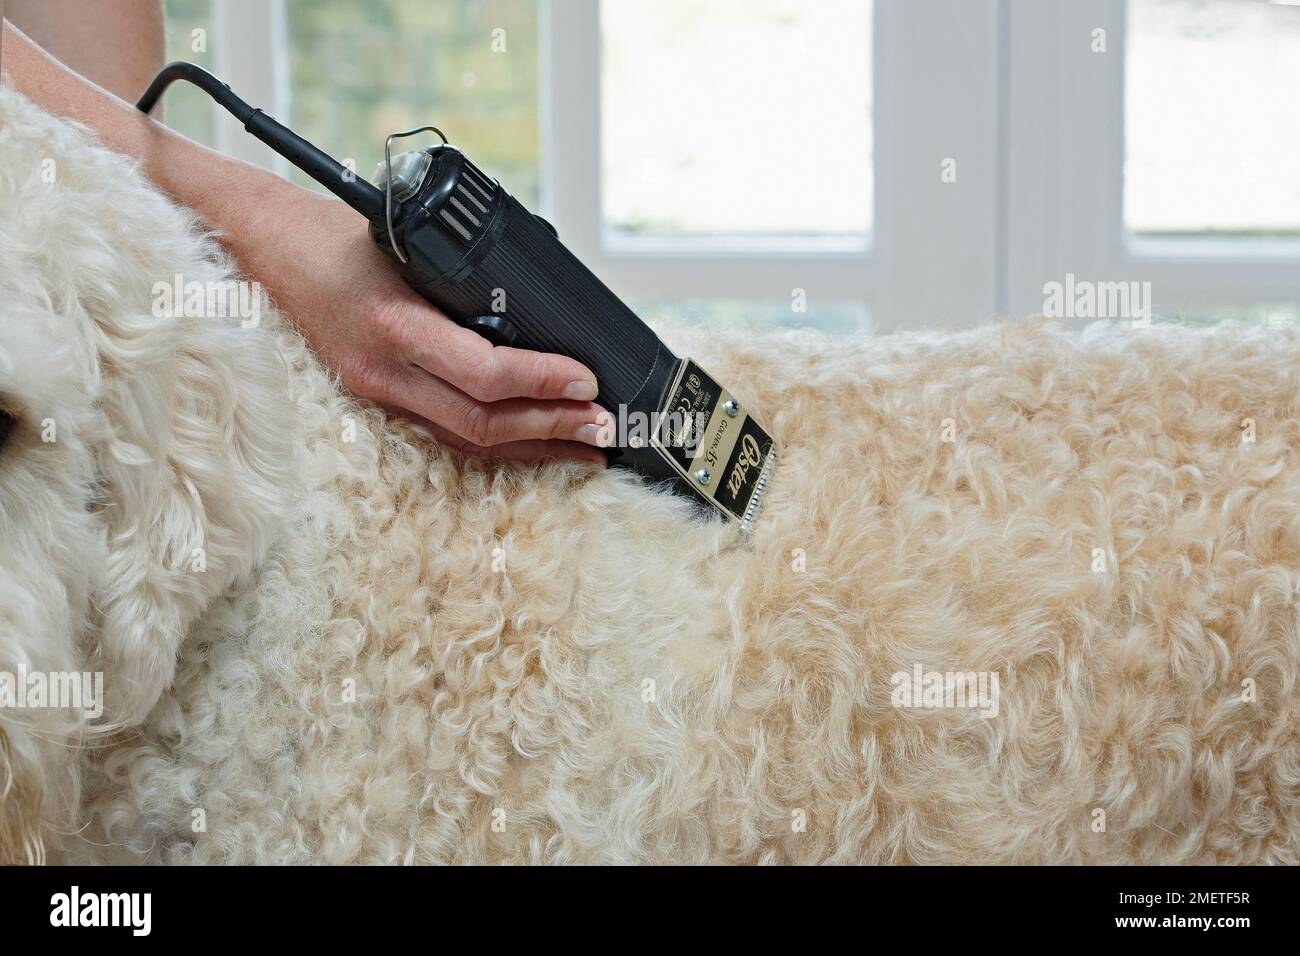 Clipping a Labradoodle (curly haired coat) Stock Photo